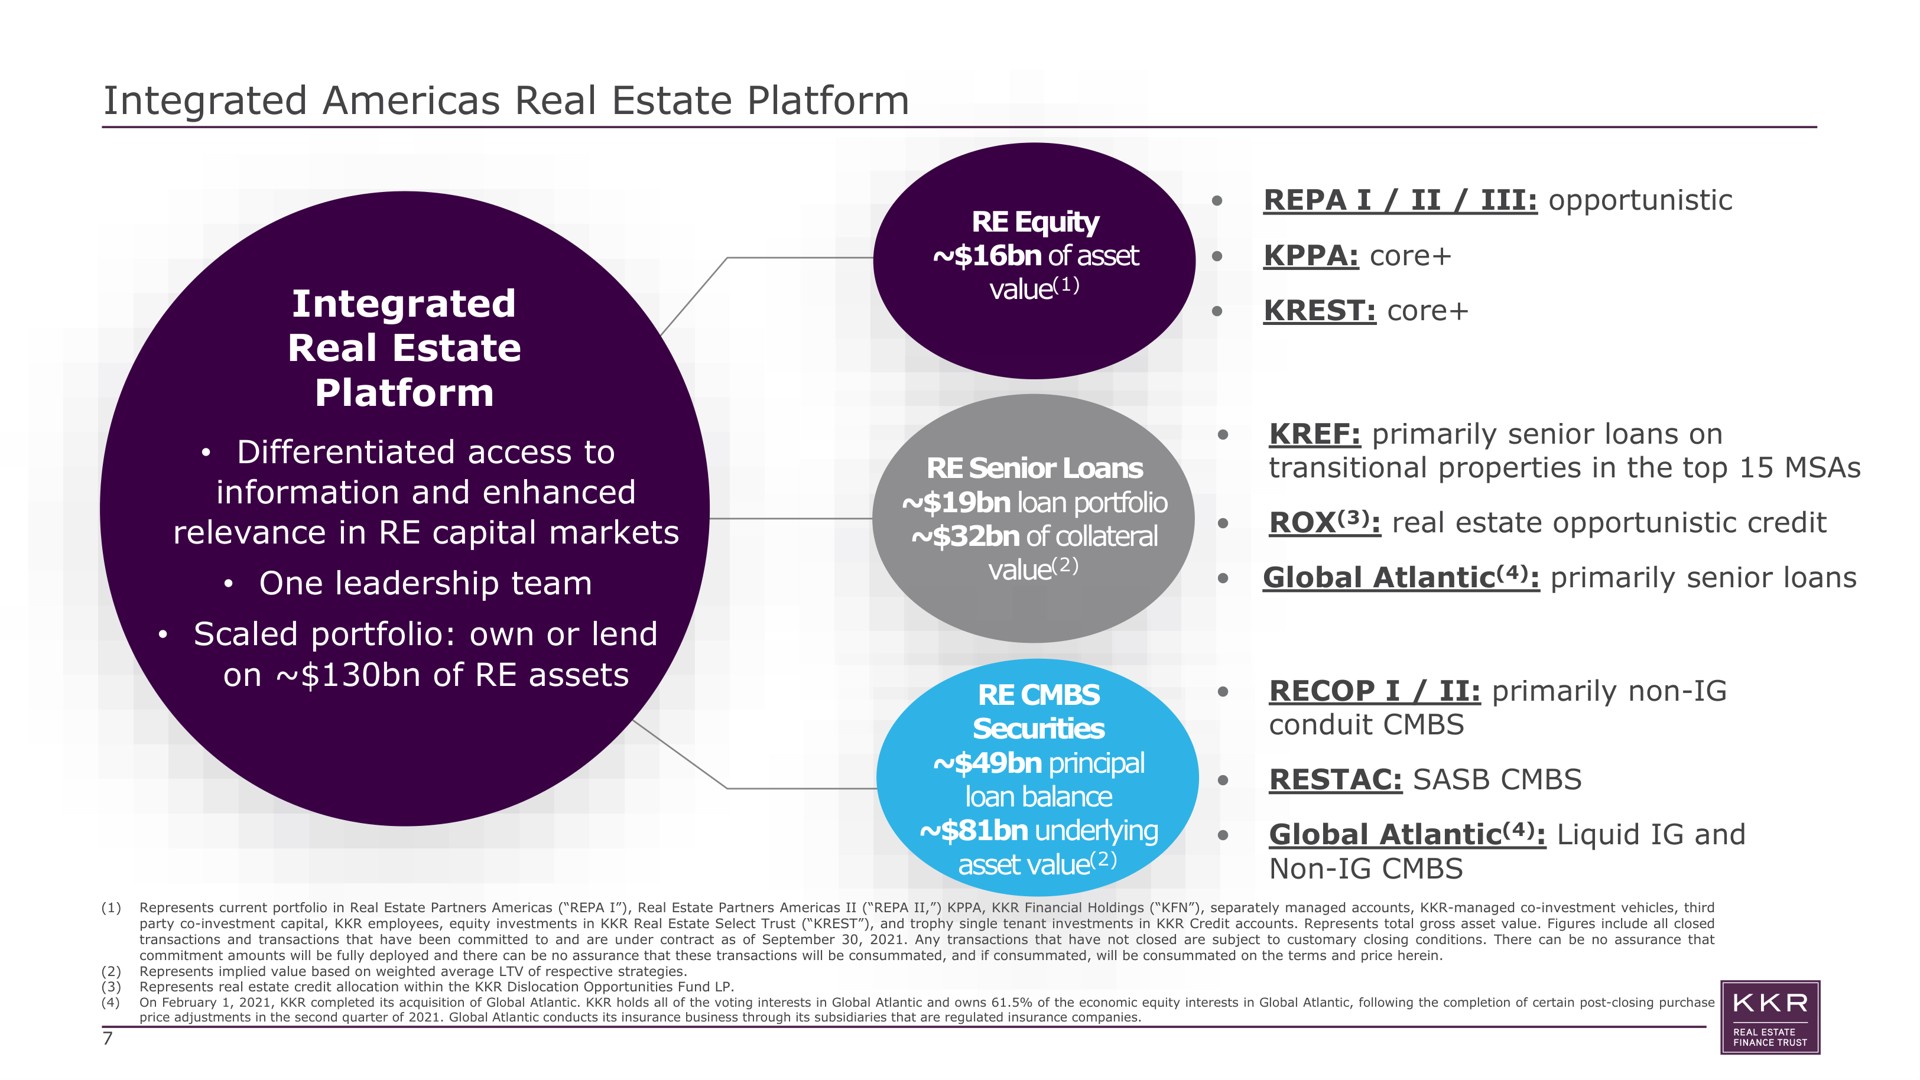 integrated real estate platform integrated real estate platform differentiated access to information and enhanced relevance in capital markets one leadership team scaled portfolio own or lend on of assets equity of asset value i opportunistic core core senior loans loan portfolio of collateral value primarily senior loans on transitional properties in the top rox real estate opportunistic credit global atlantic primarily senior loans securities principal loan balance underlying asset value i primarily non conduit global atlantic liquid and non see if | KKR Real Estate Finance Trust